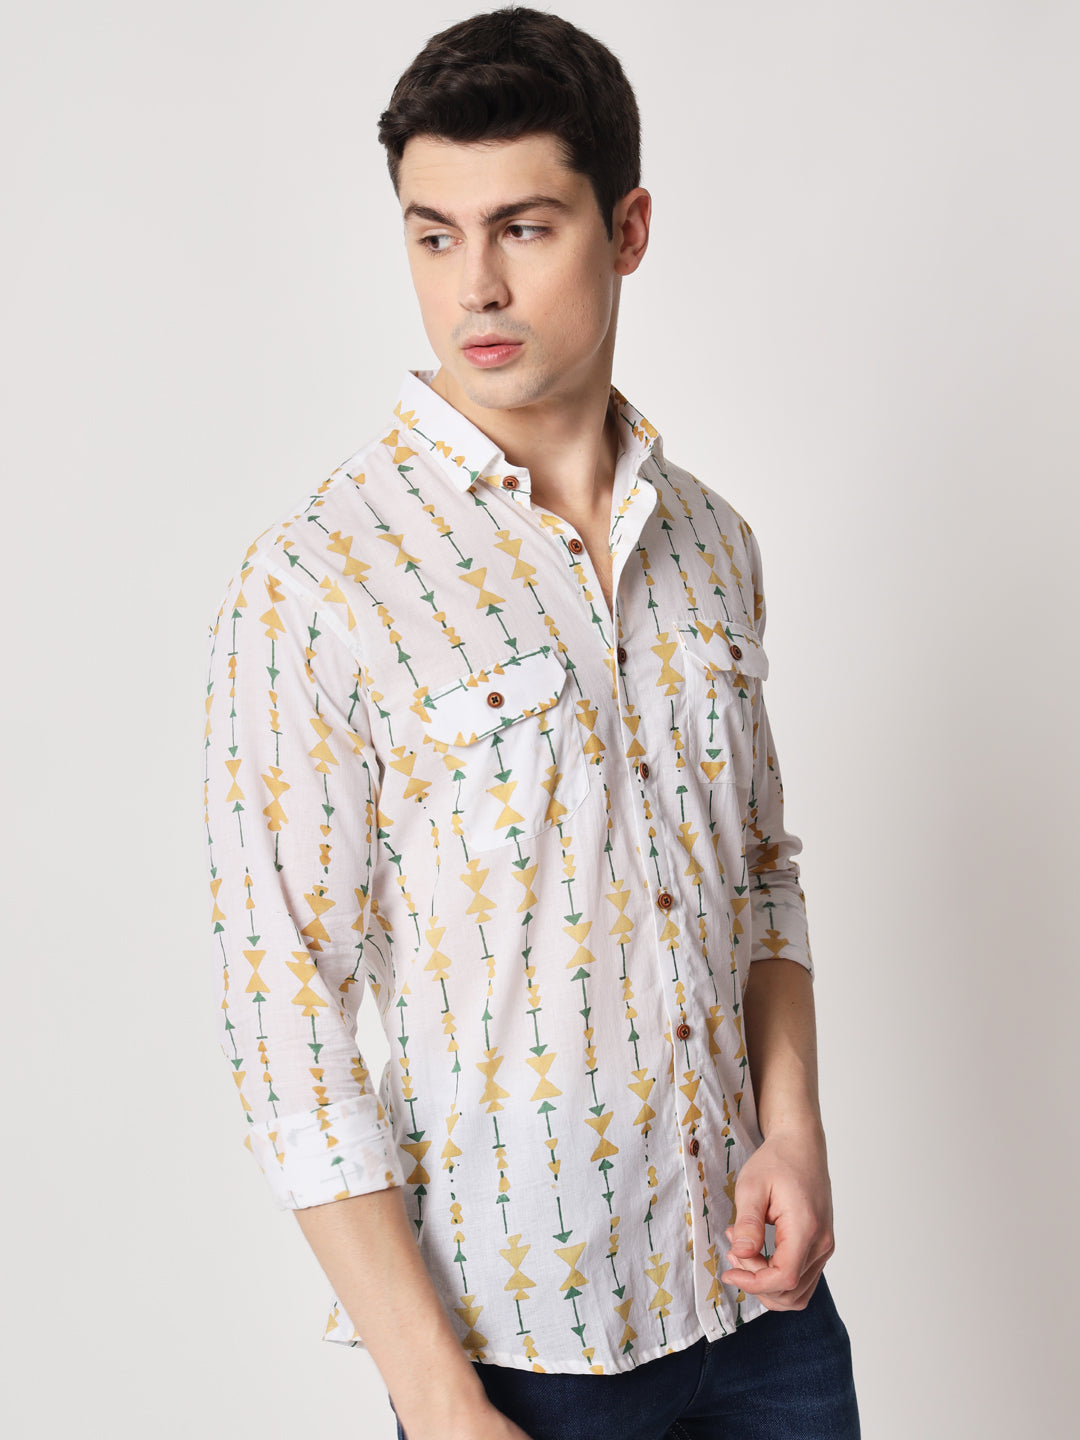 Firangi Yarn 100% Cotton Block Geomatric Printed Casual Full Sleeves With Flap Pockets Men's Party Wear Shirt